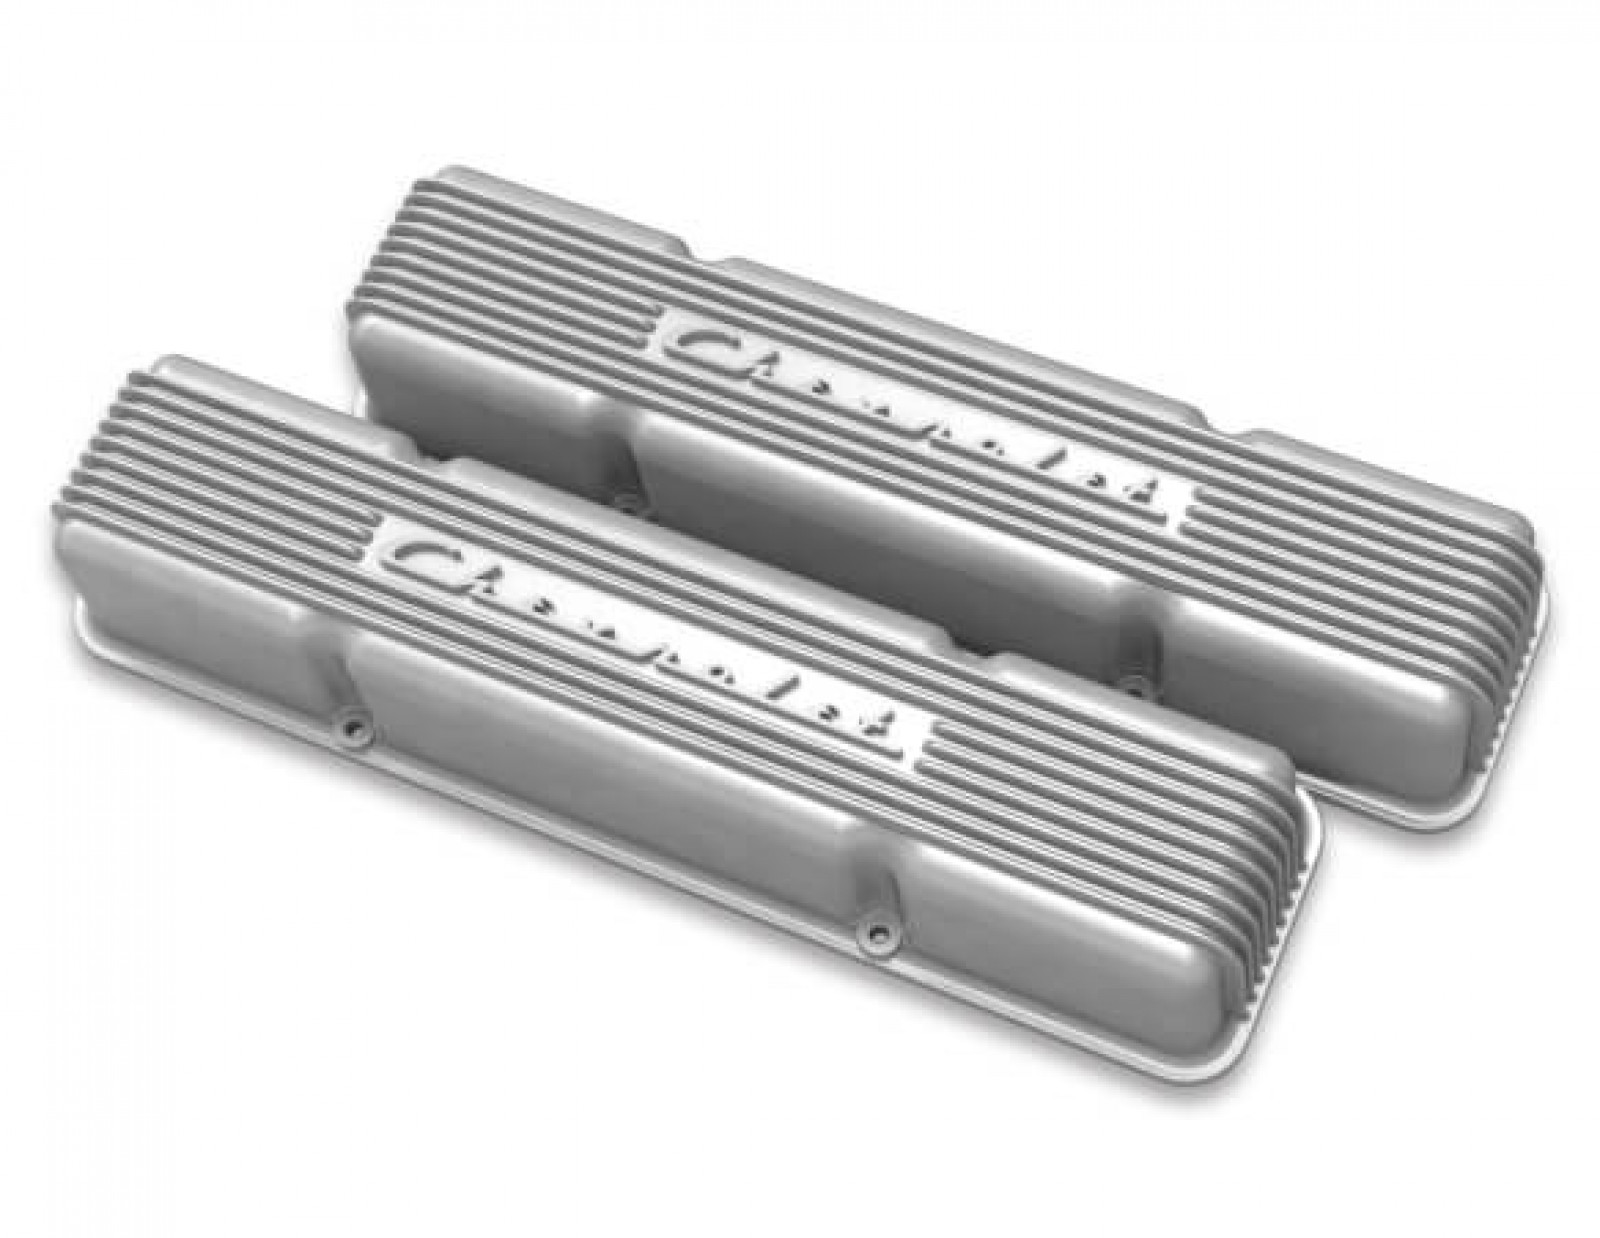 Buy Holley GM Licensed Vintage Series SBC Valve Covers 241-106 for 239.95  at Armageddon Turbo  Performance